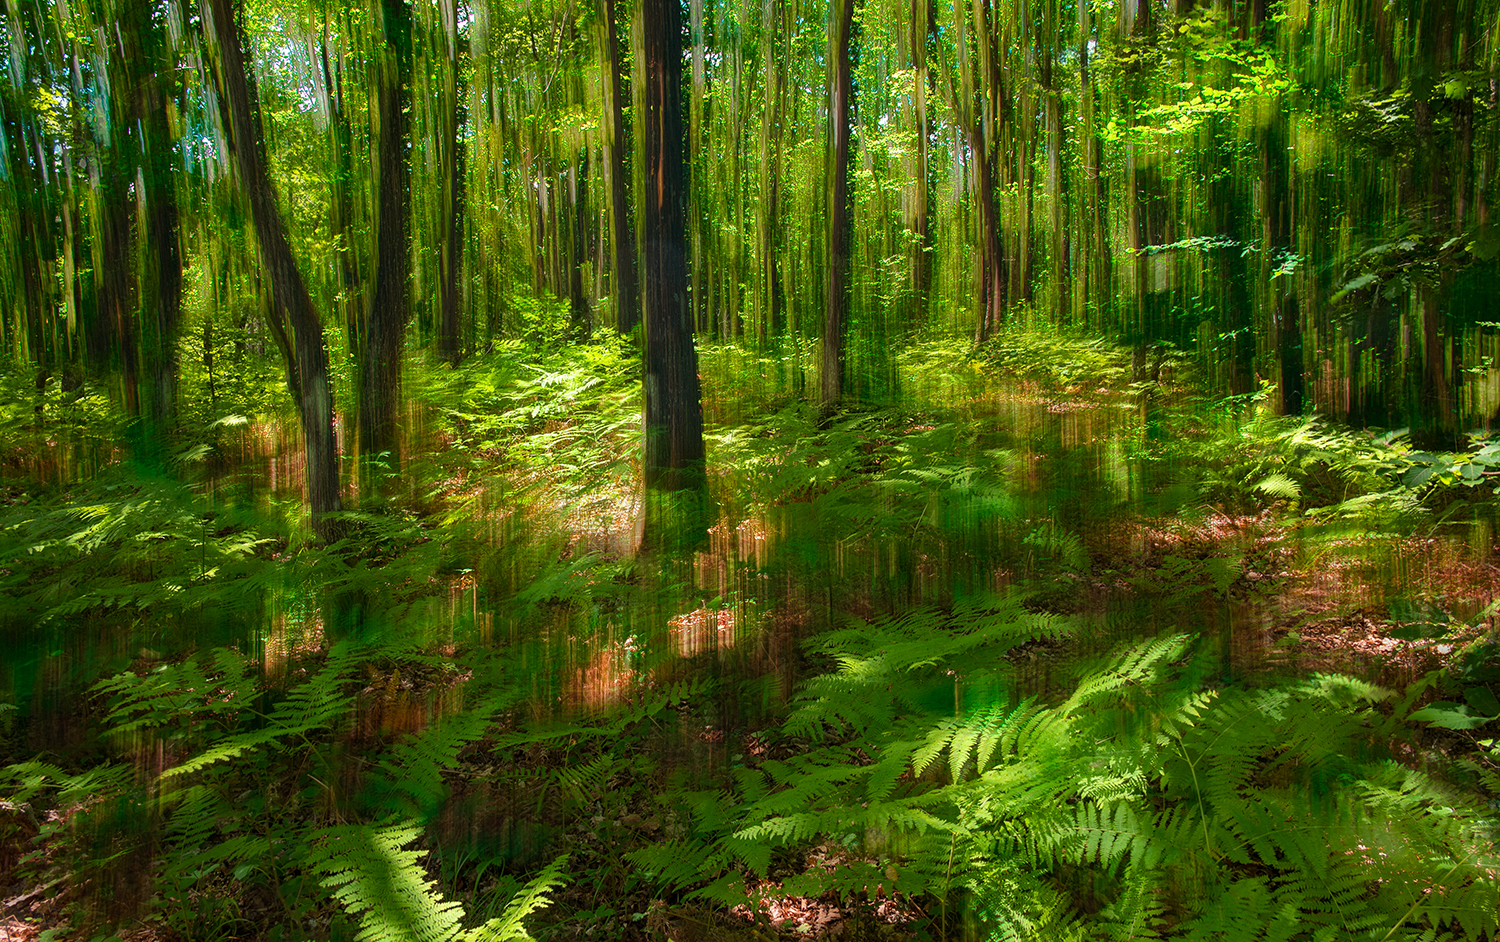 The fern forest...